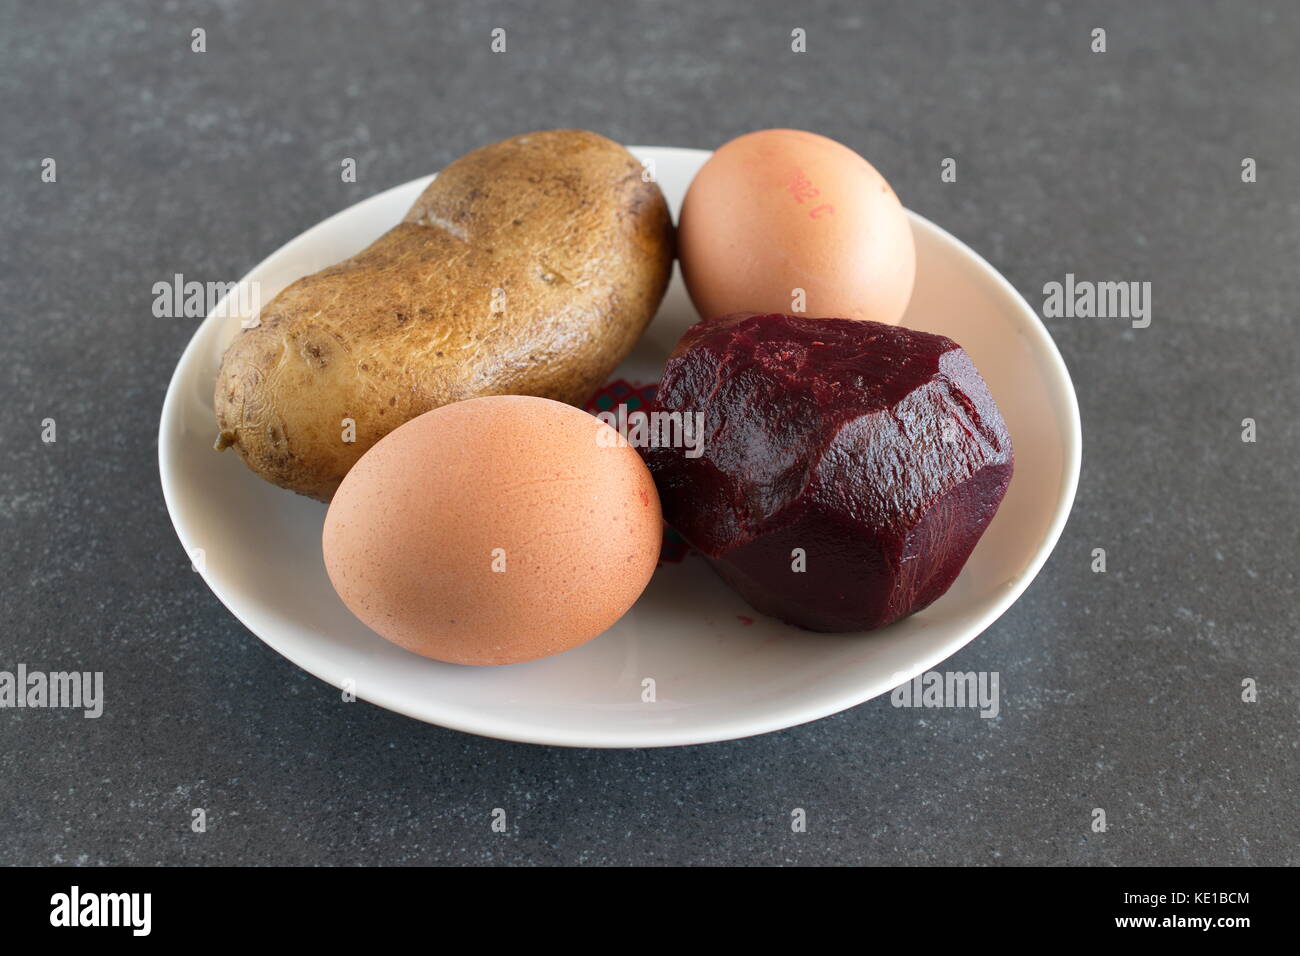 Boiled potatoes, beetroot and eggs. ingredients. Stock Photo